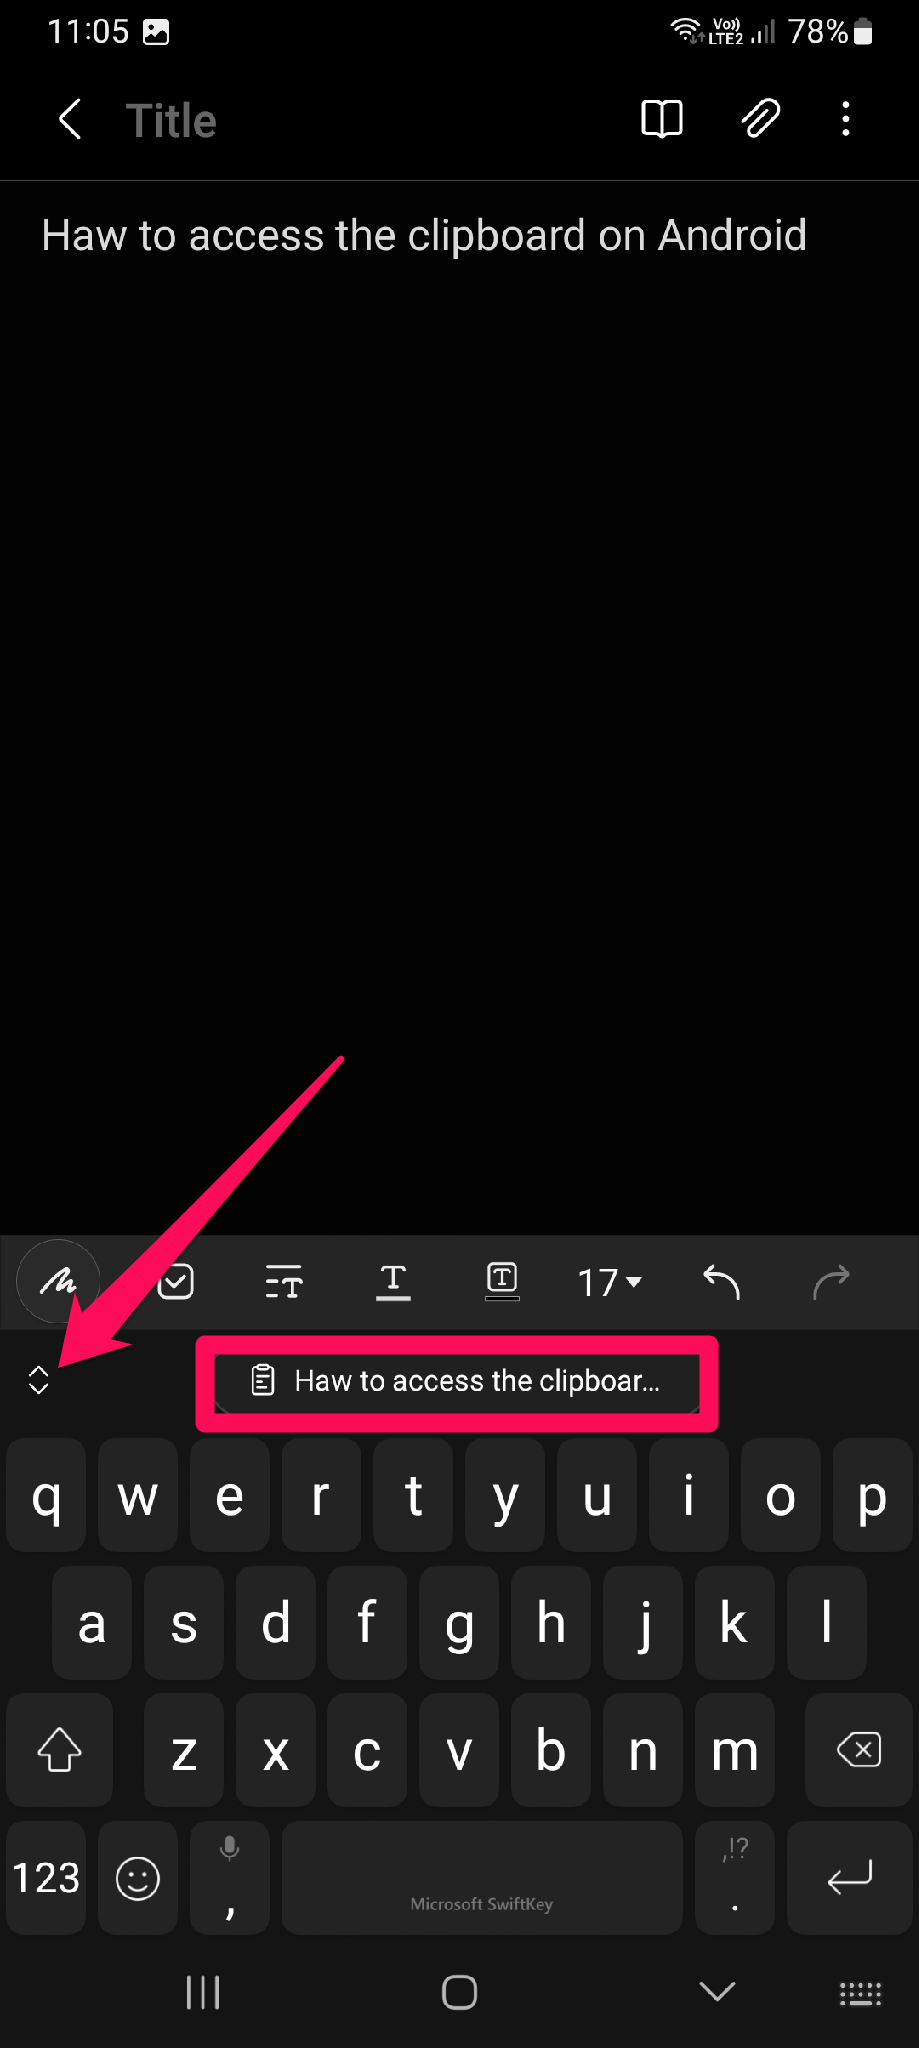 Click on the icon at the top left of the keyboard How to access the clipboard on Android